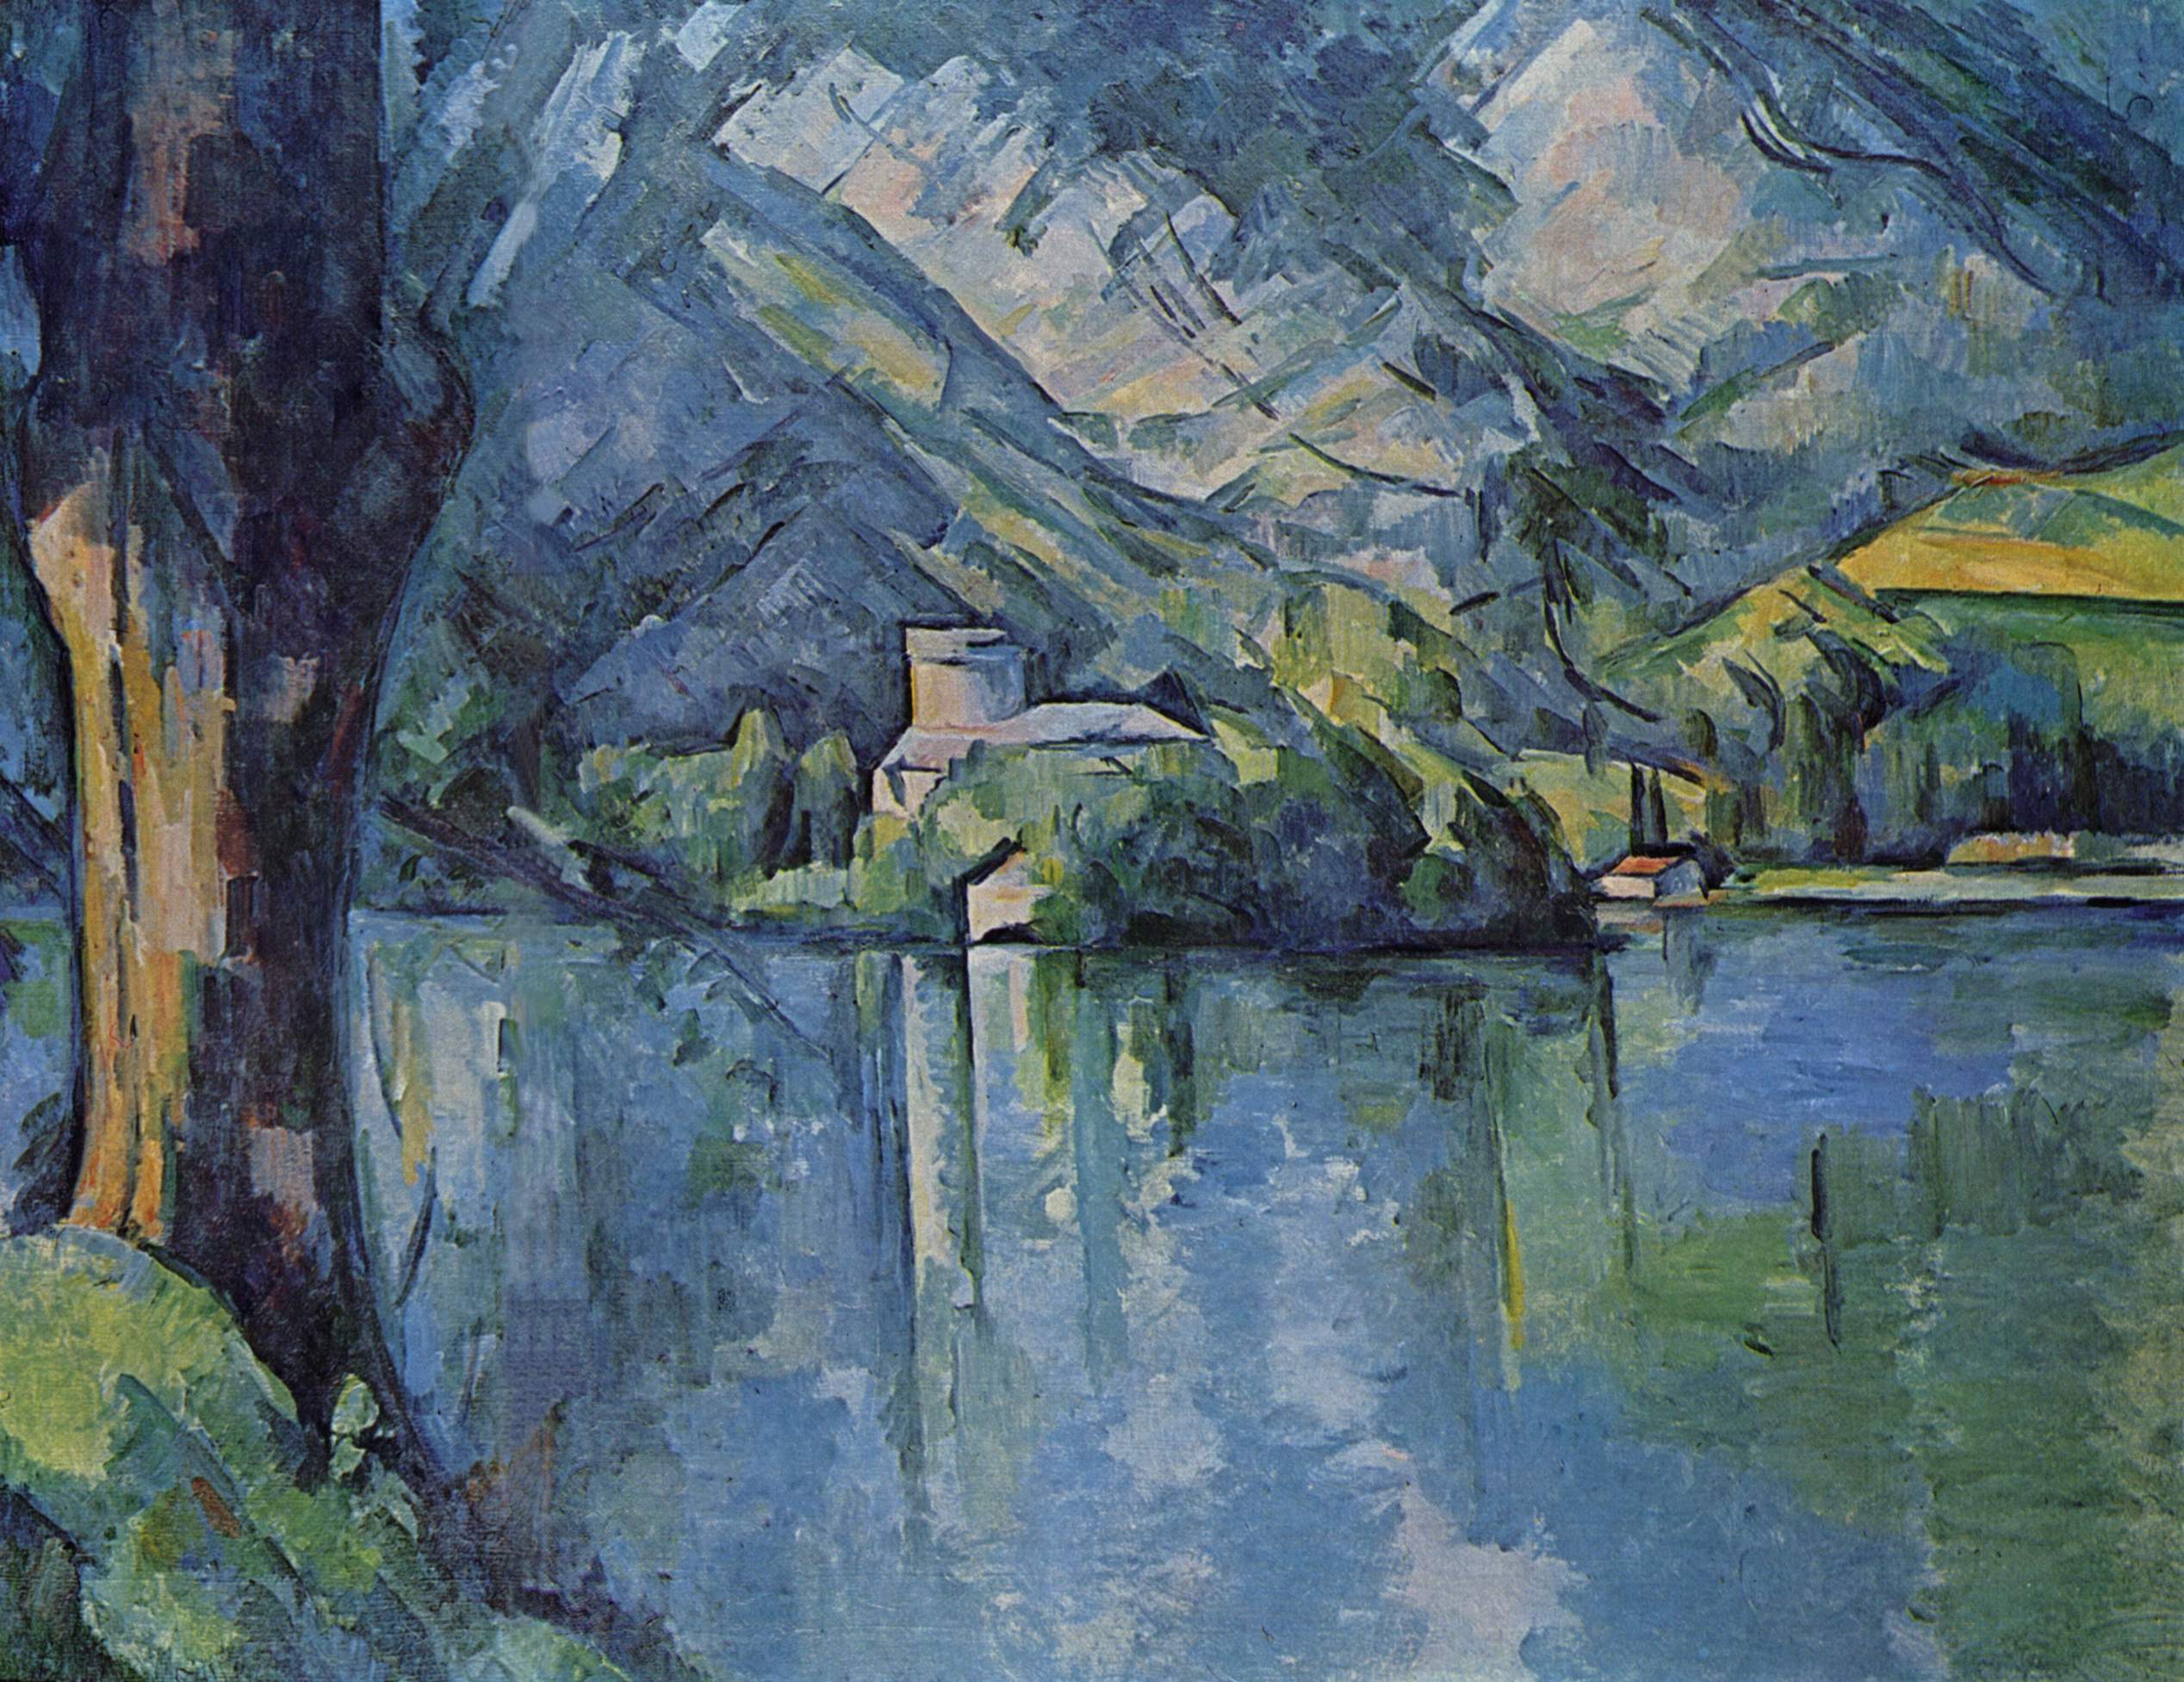 Lac d'Annecy by Paul Cézanne - 1896 - 81 x 65 cm The Courtauld Gallery